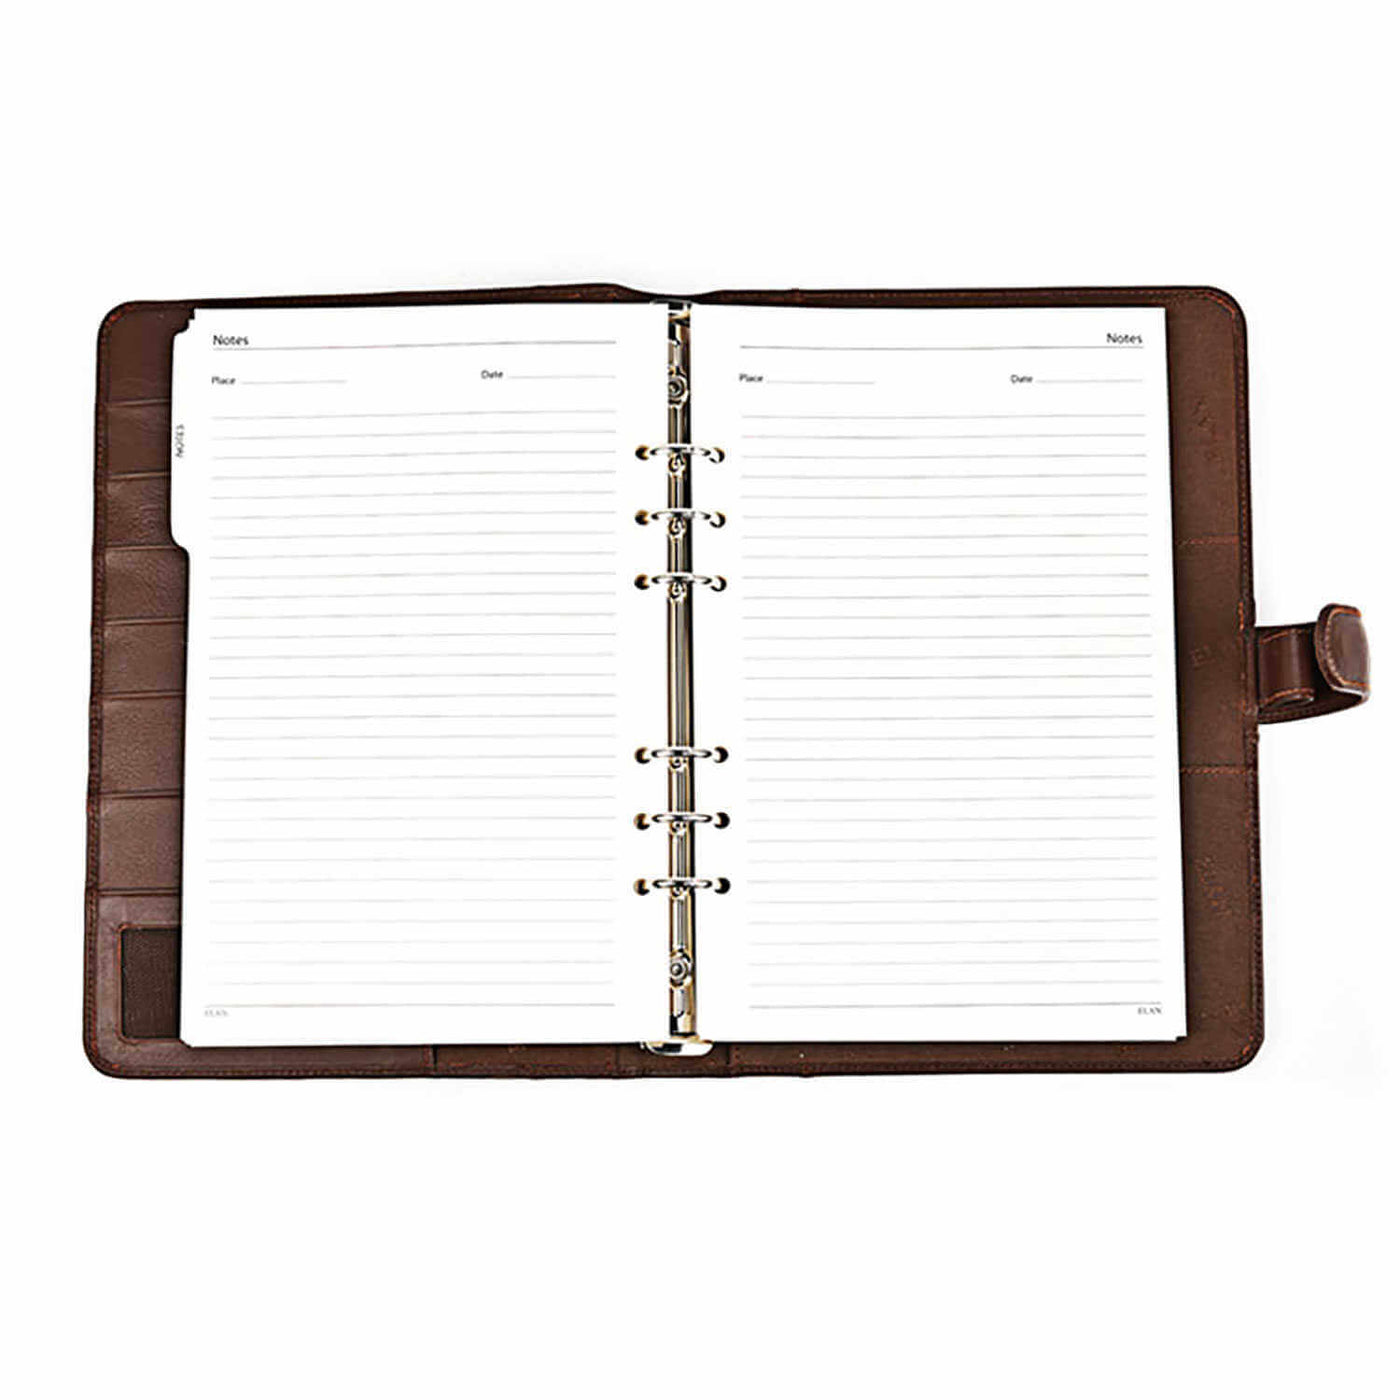 Elan Business Non Leather Undated Journal, Brown - A5+ 2